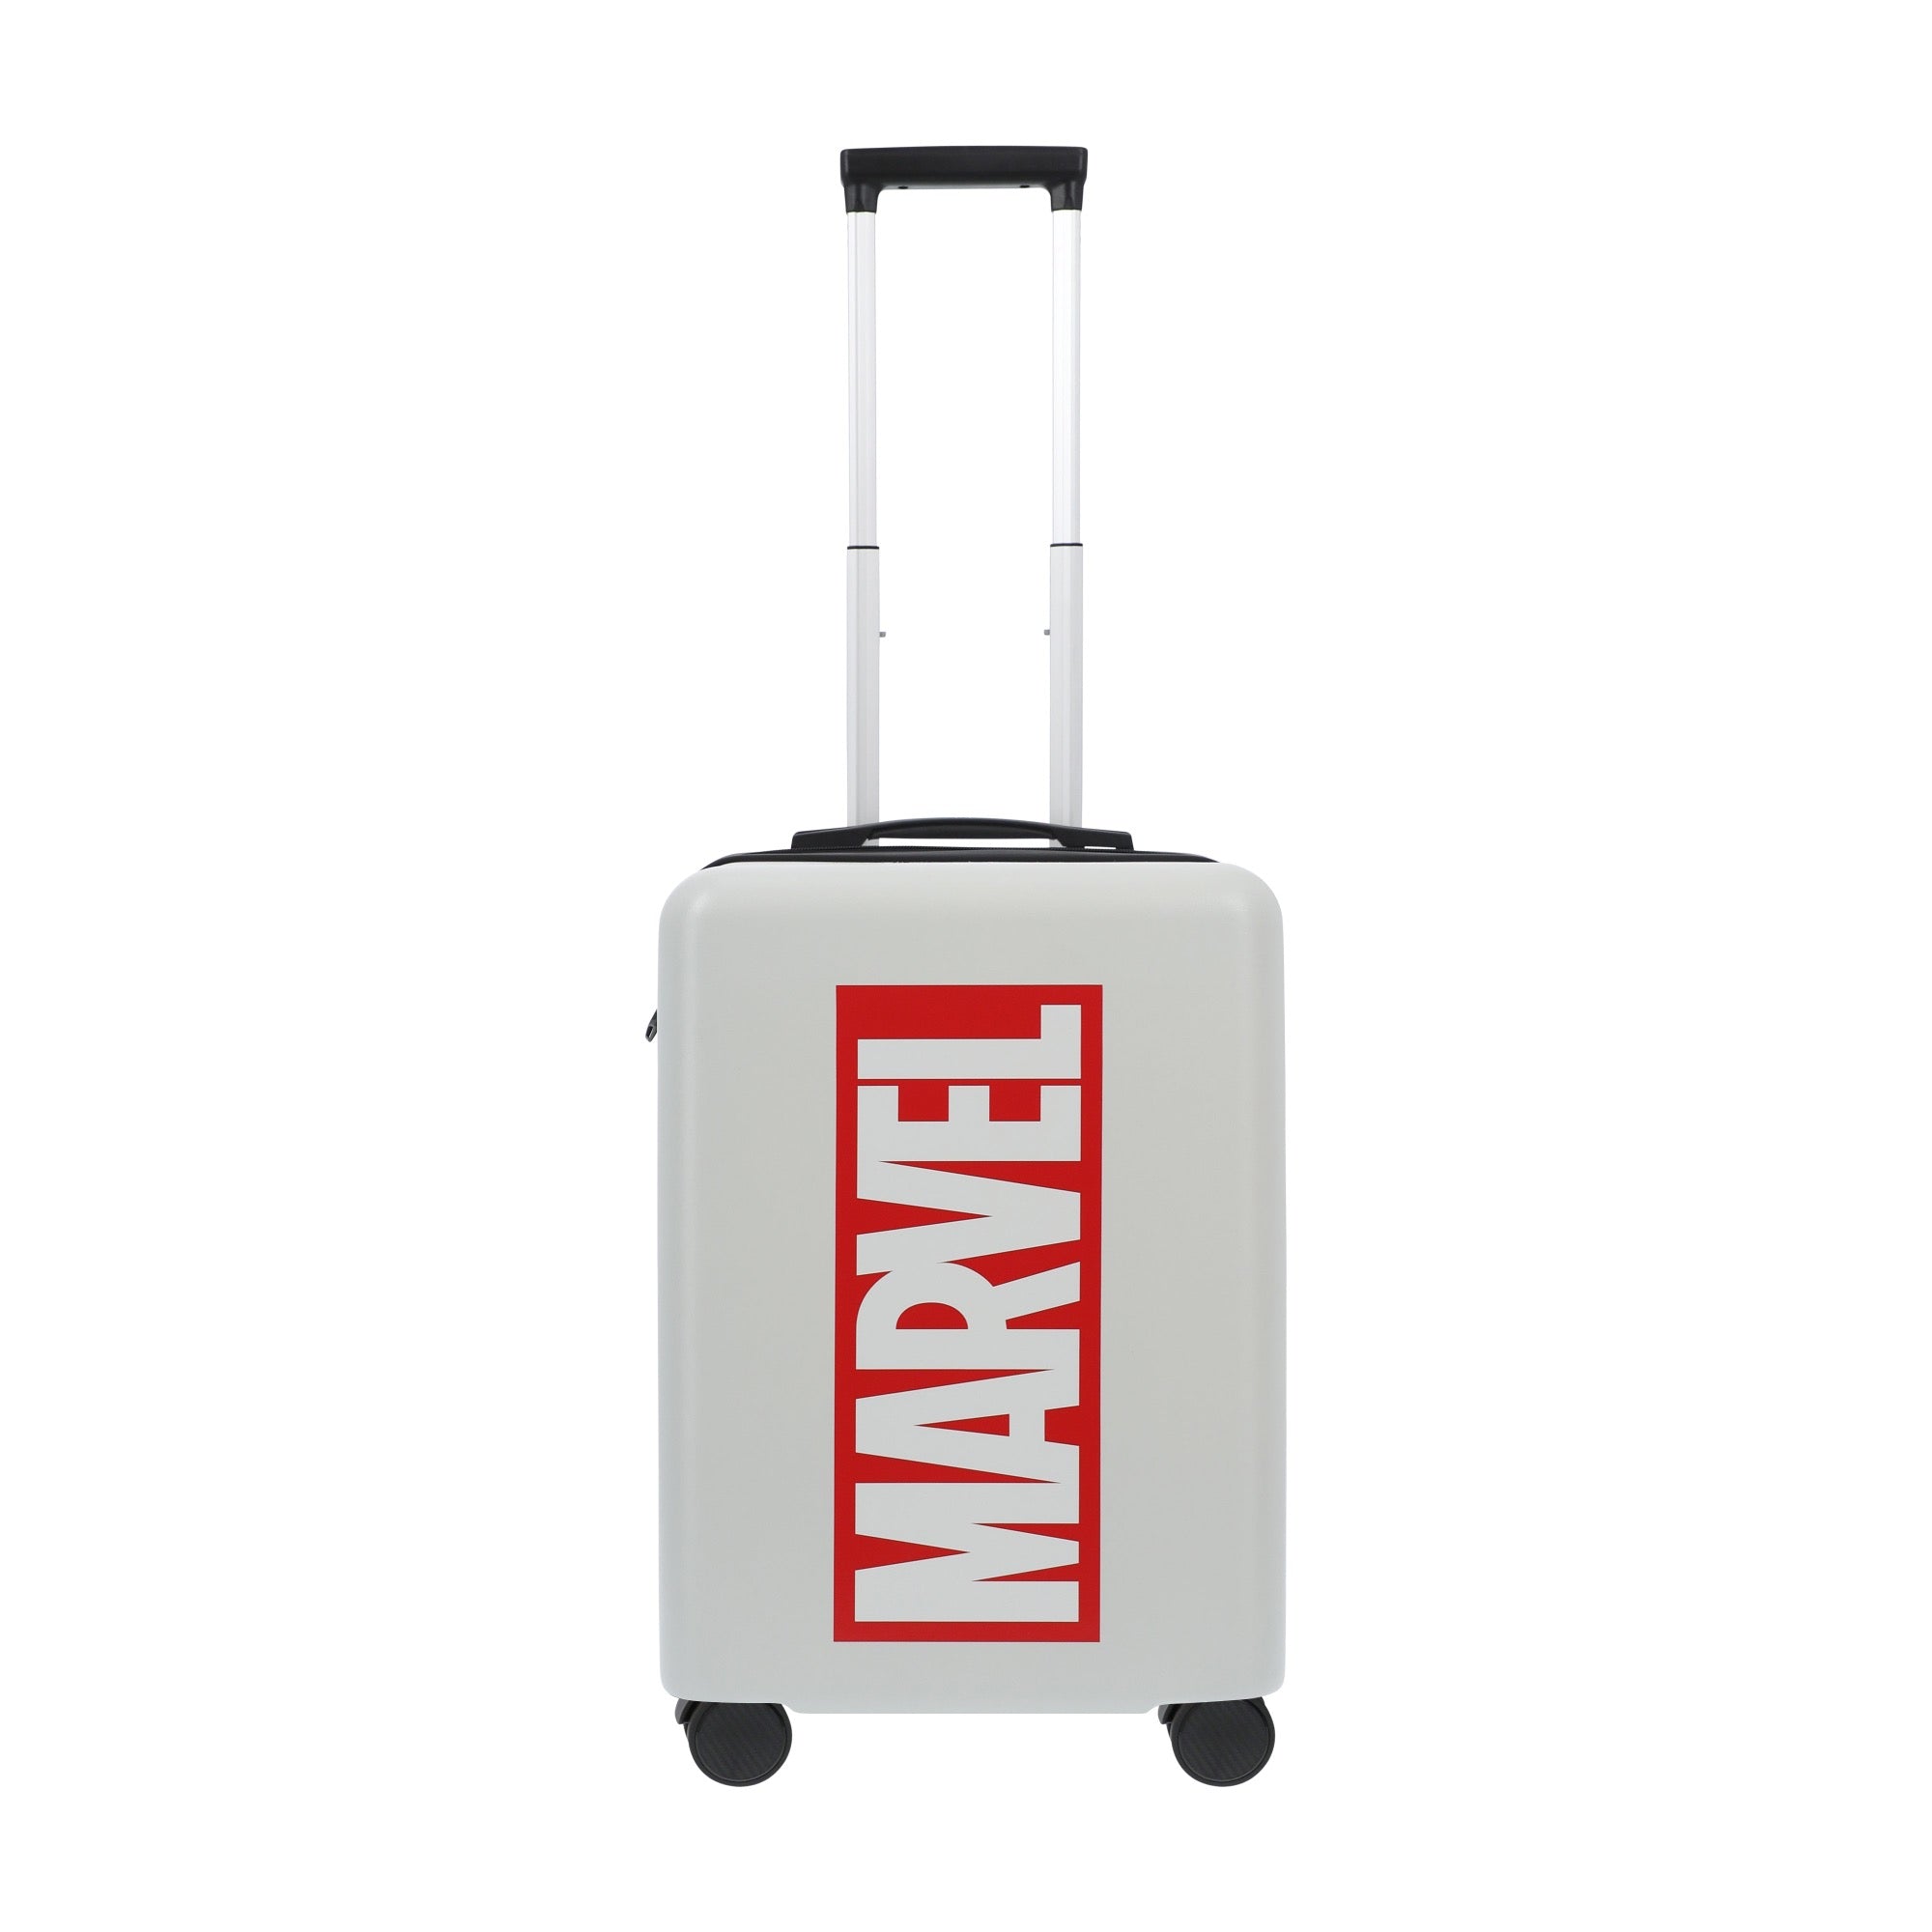 White marvel brick 22.5" carry-on spinner suitcase luggage by Ful